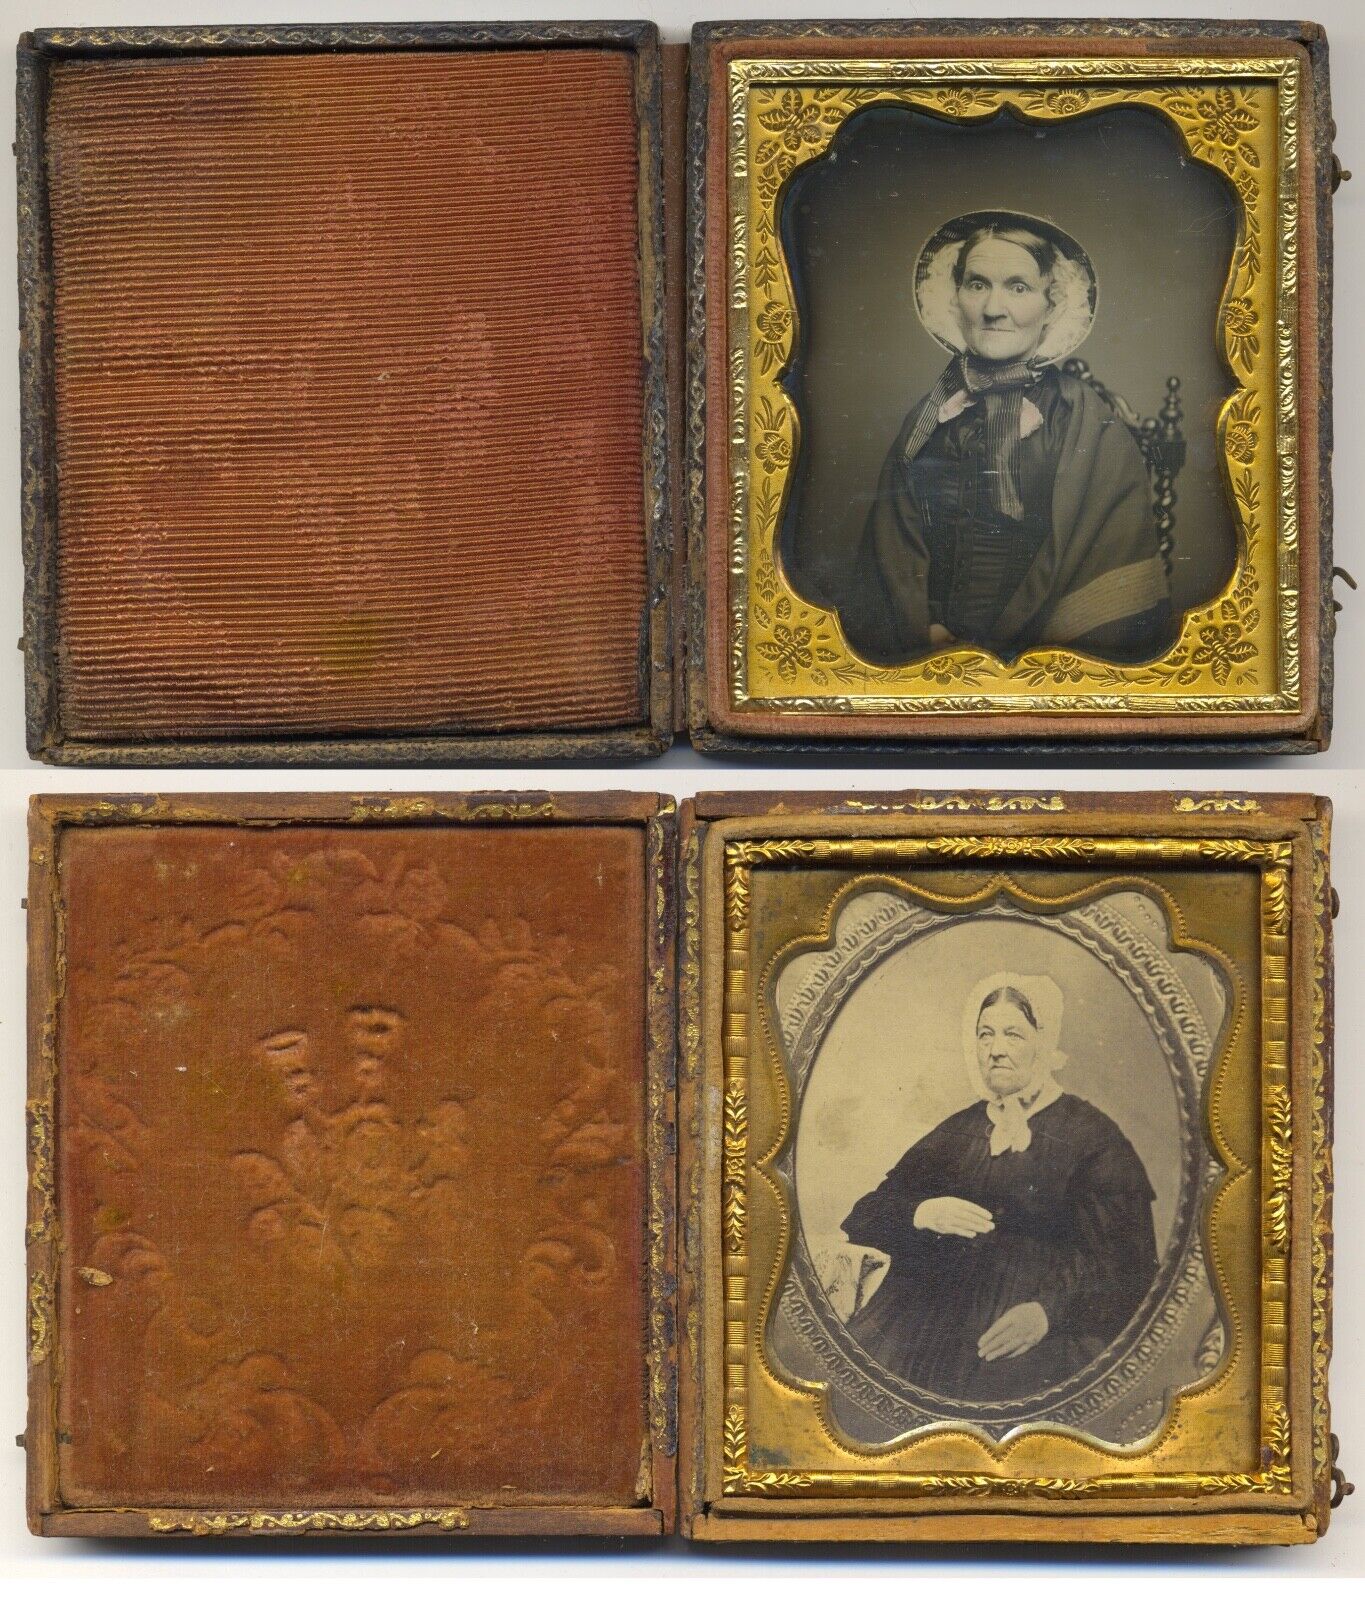 Daguerreotype and CDV-Ambrotype-copy of same woman